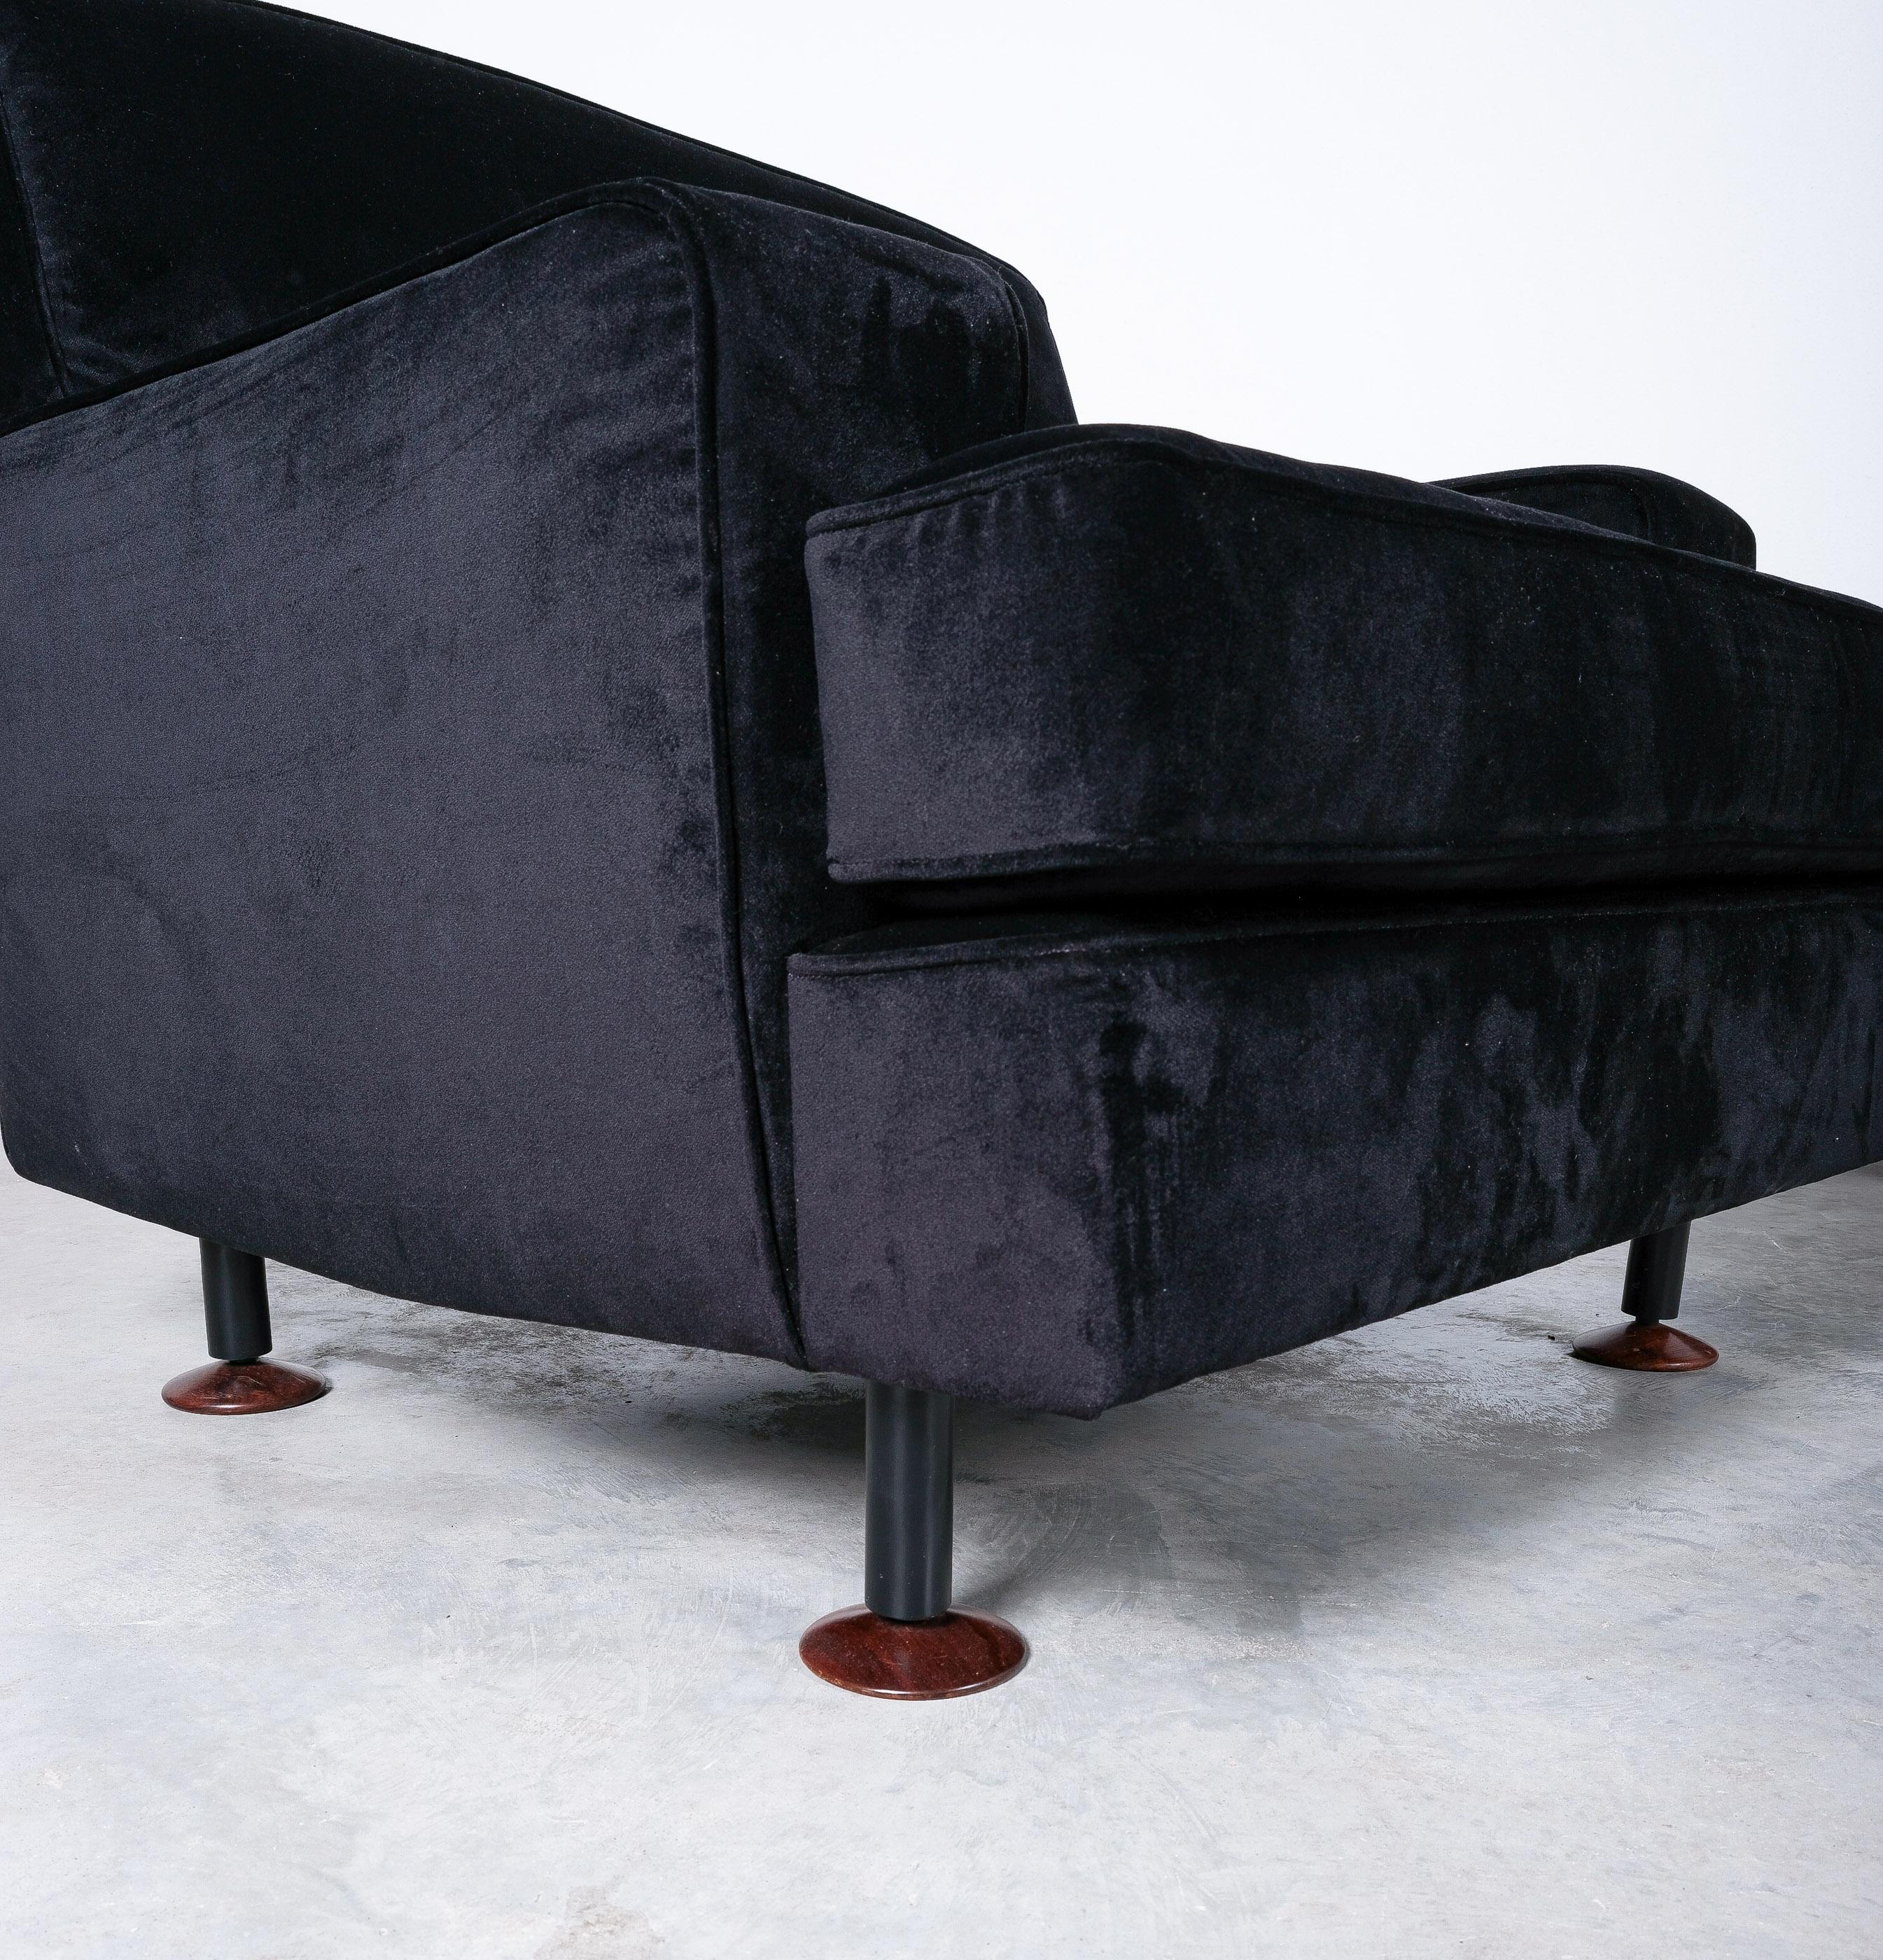 Steel Marco Zanuso 'Square' Black Velvet Chairs with Teak Feet, Italy, circa 1955 For Sale